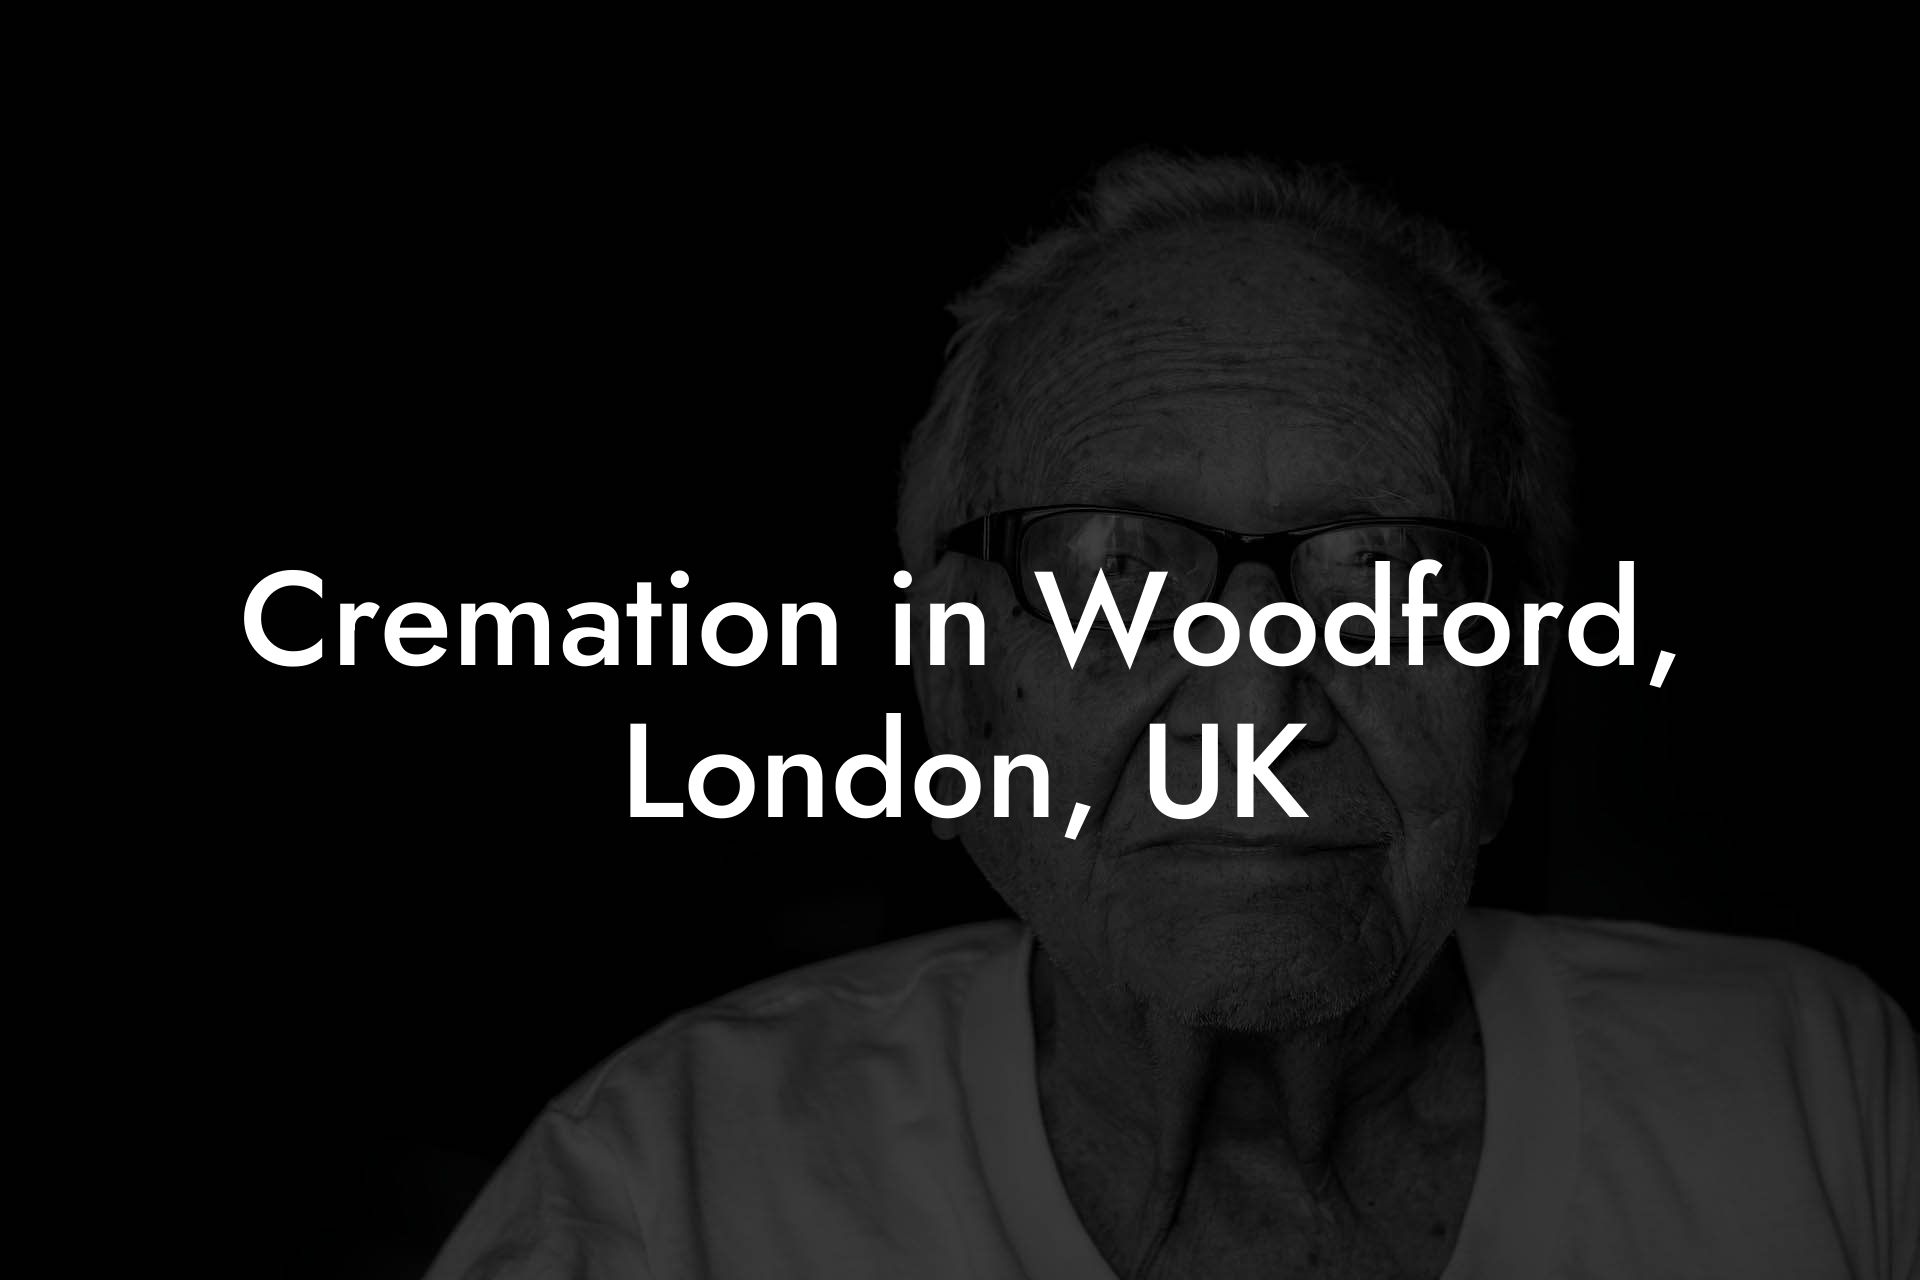 Cremation in Woodford, London, UK